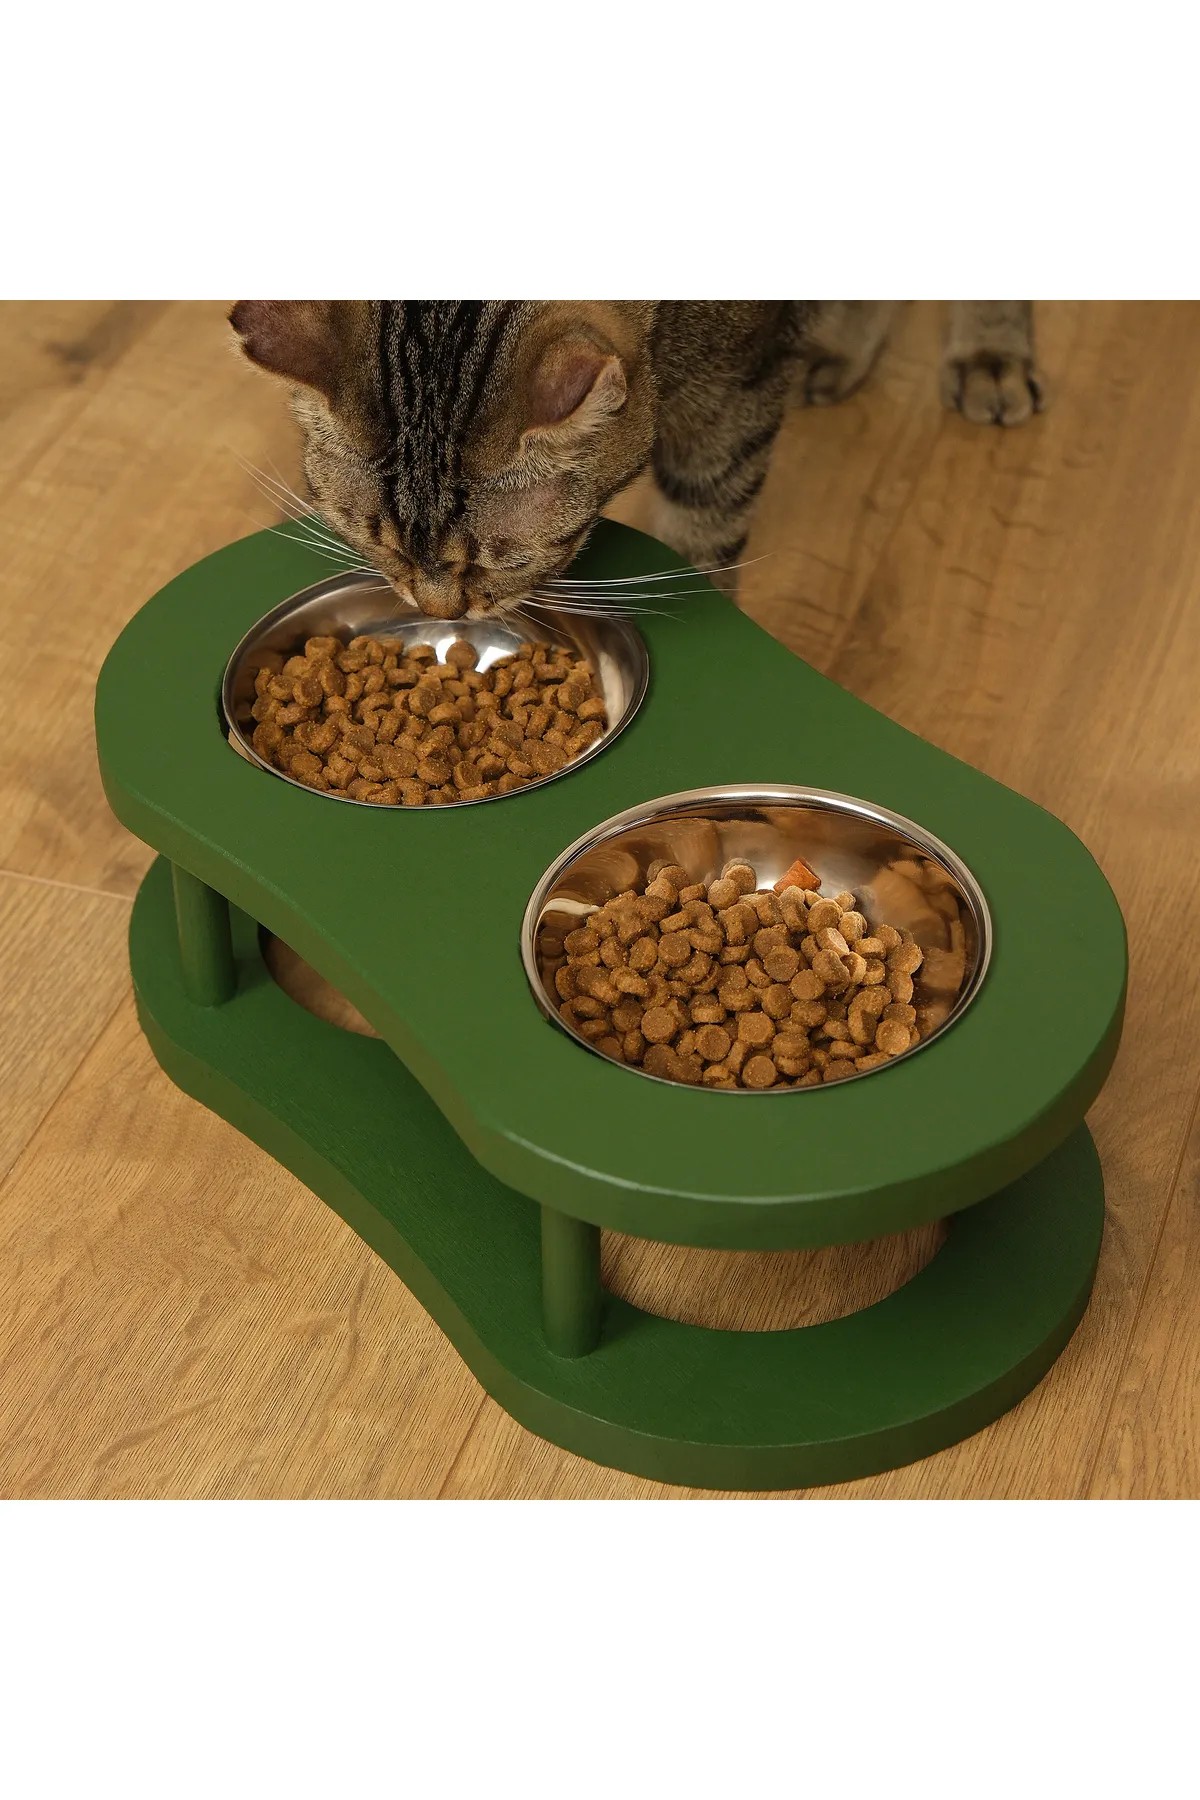 Luxury Cat Food Container With Coy Green Wooden Steel Bowl